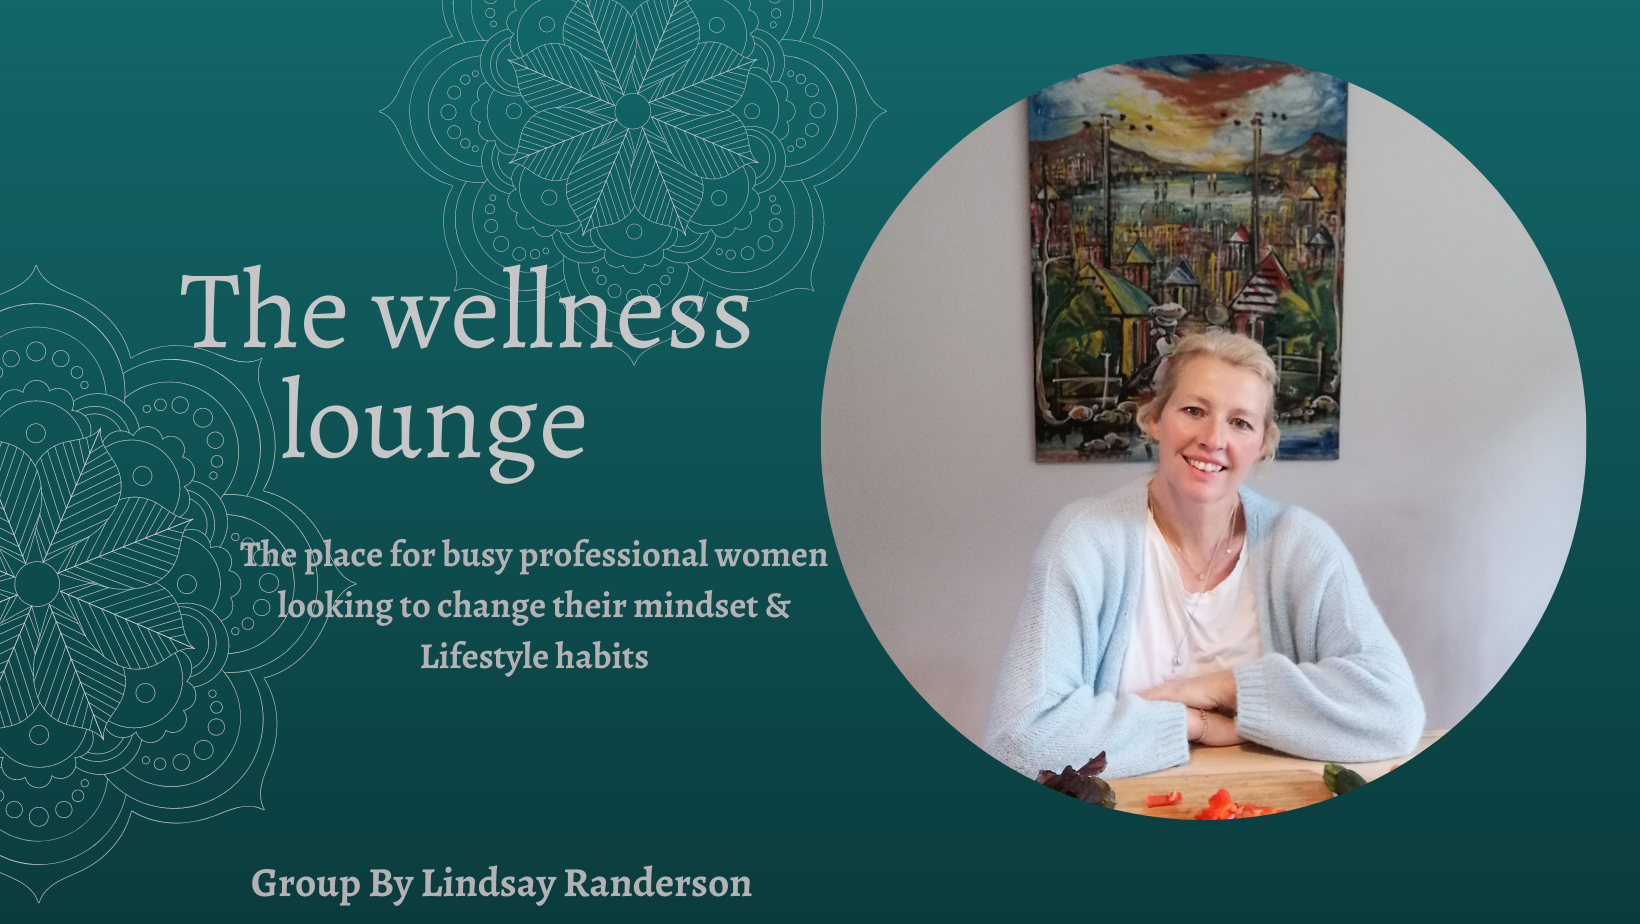 Come & join my free Facebook Group: The Wellness Lounge and be part of an amazing community of women